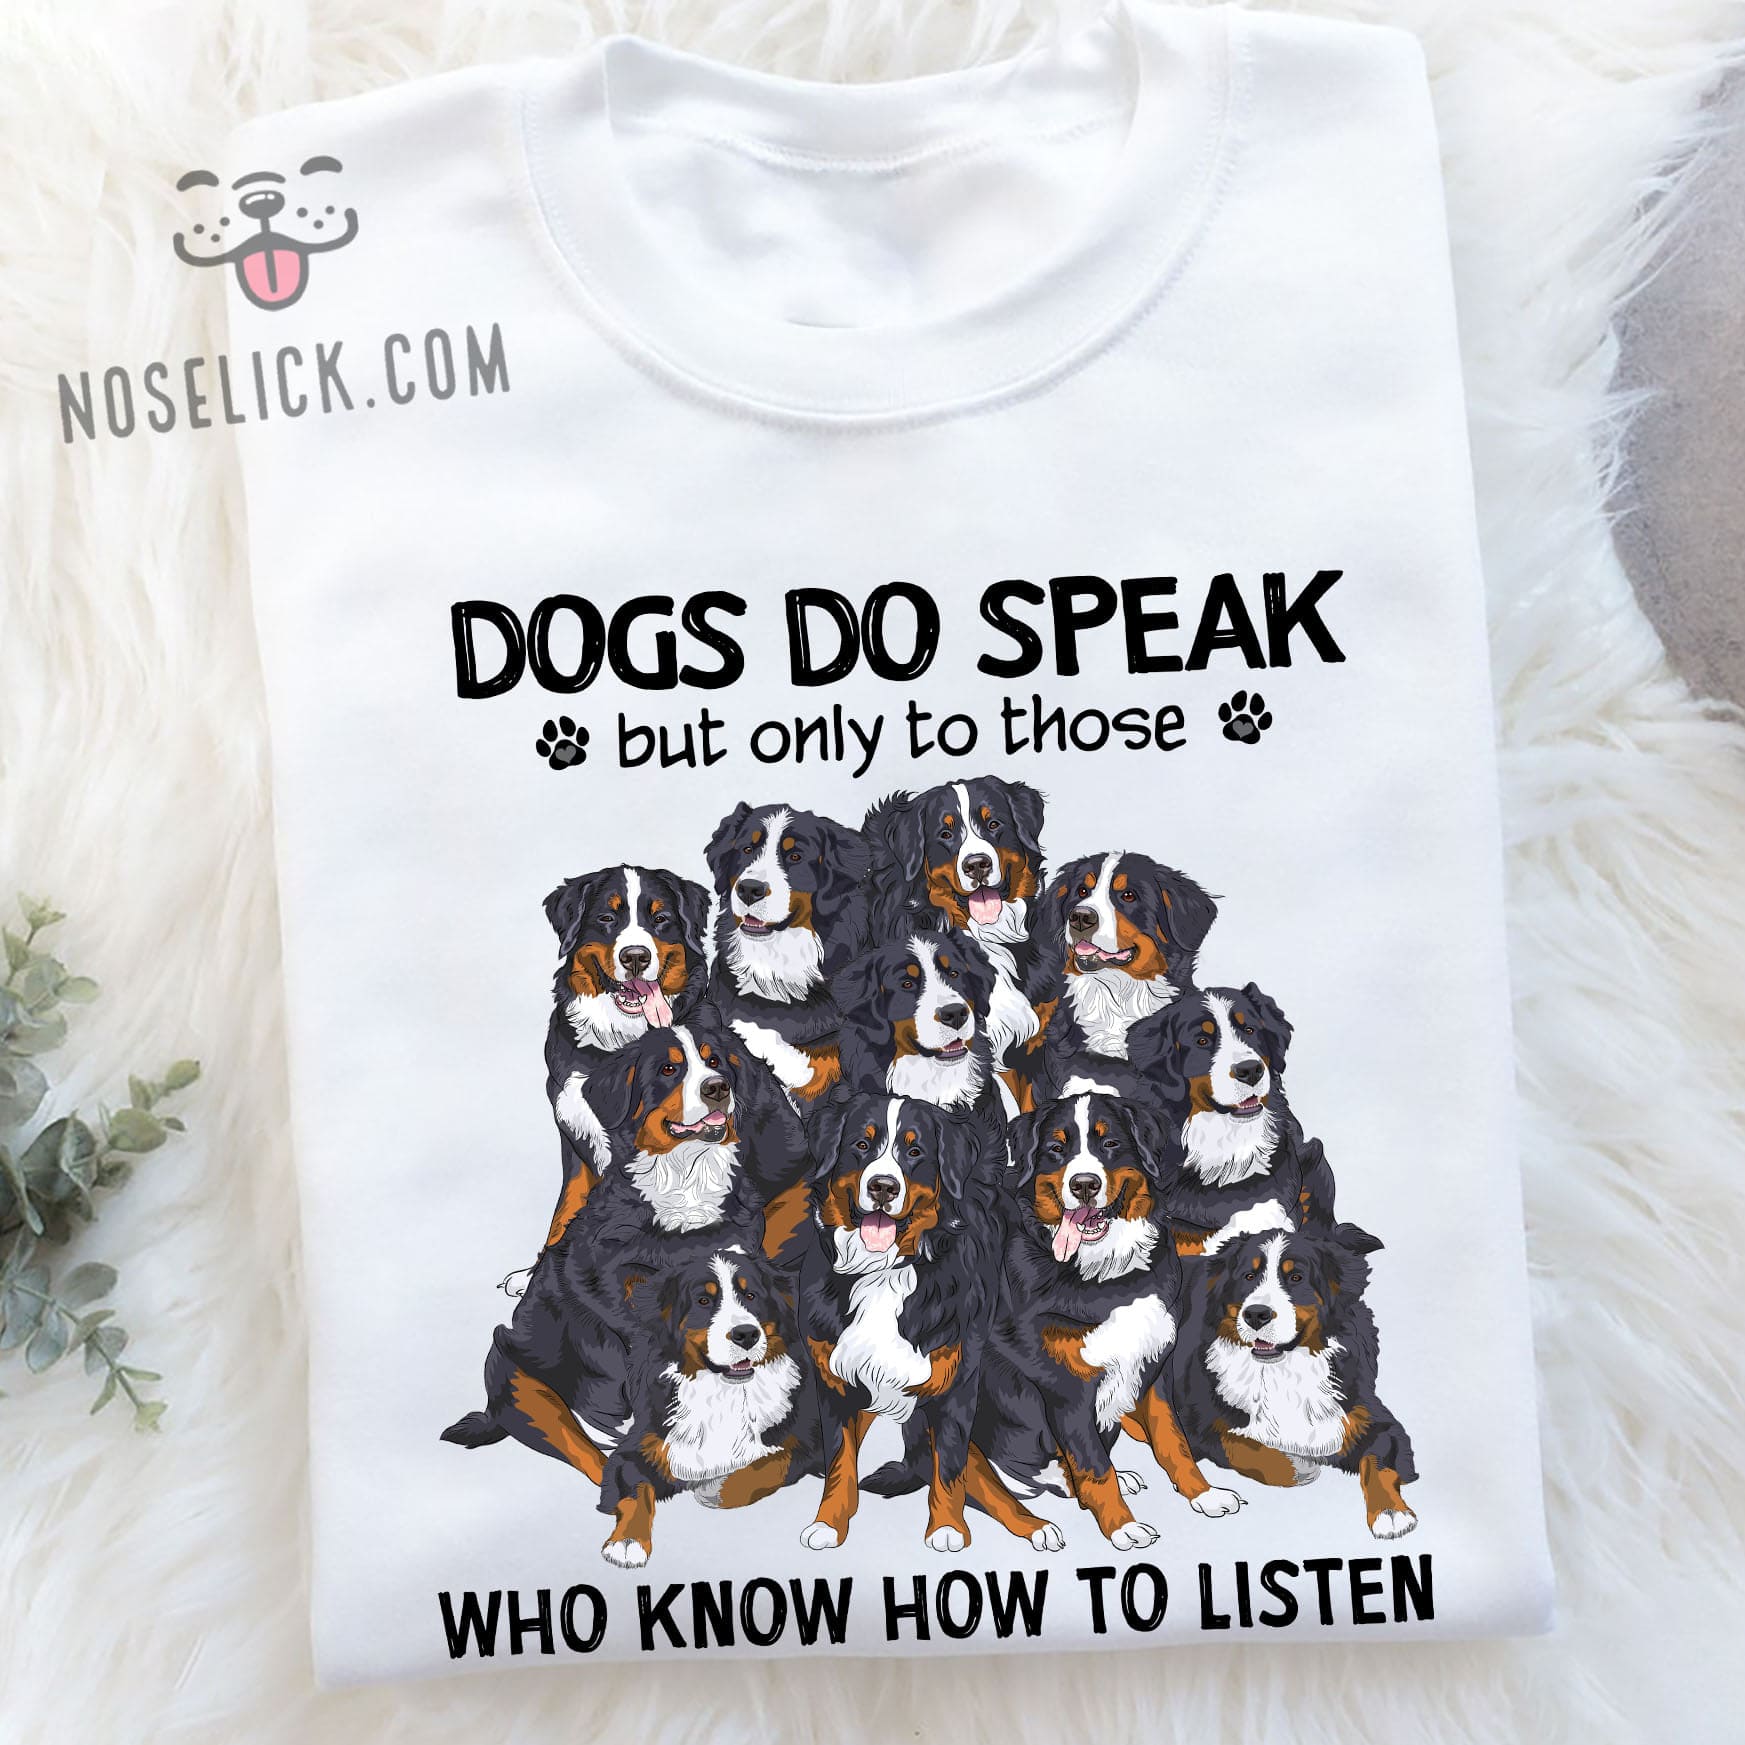 Sennenhund Berner - Dogs do speak but only to those who know how to listen